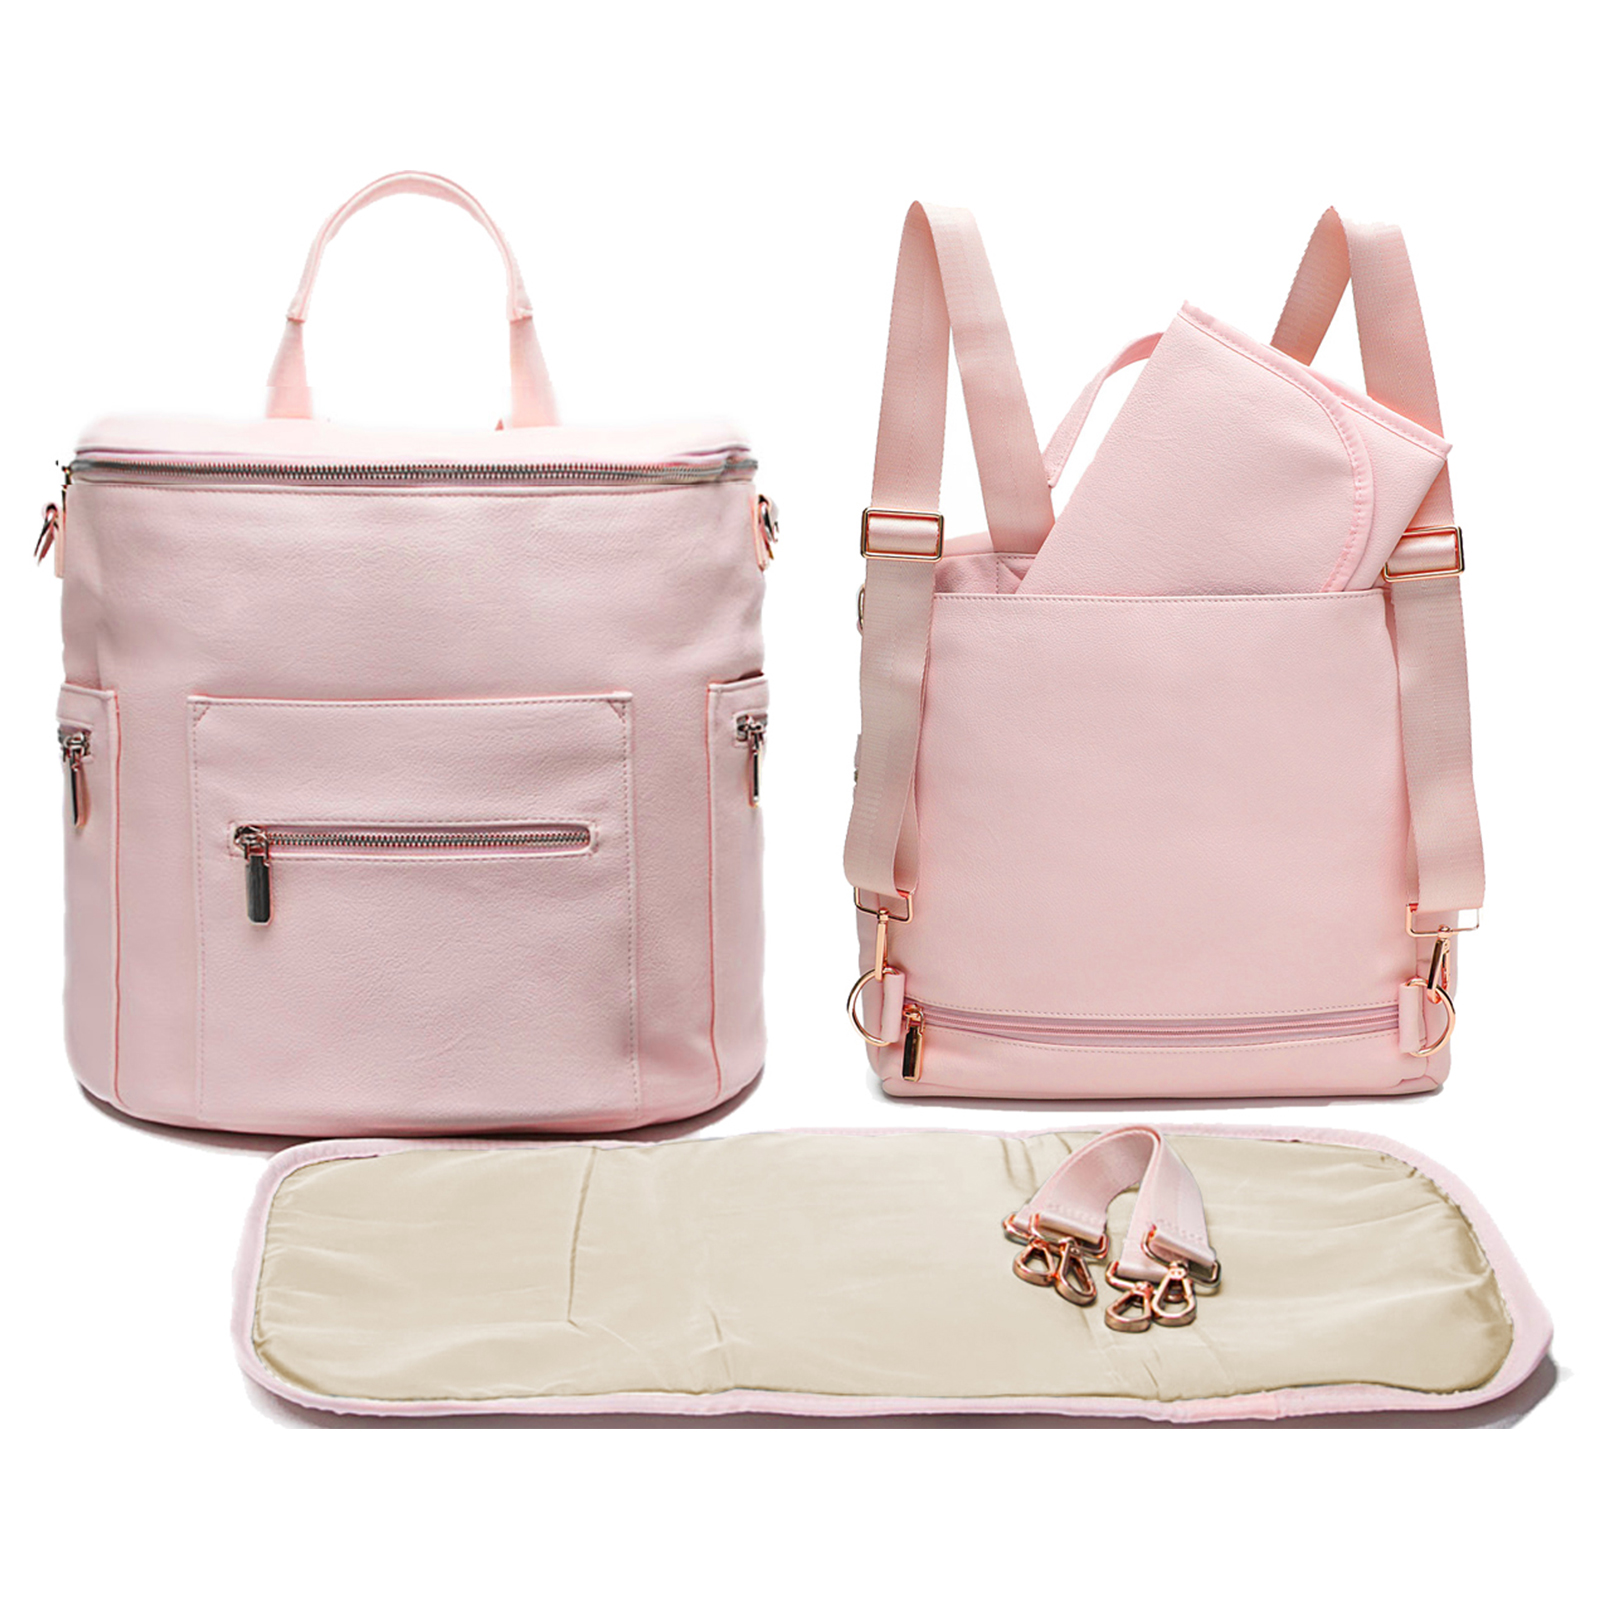 Leather Diaper Bags – Olli and Rose